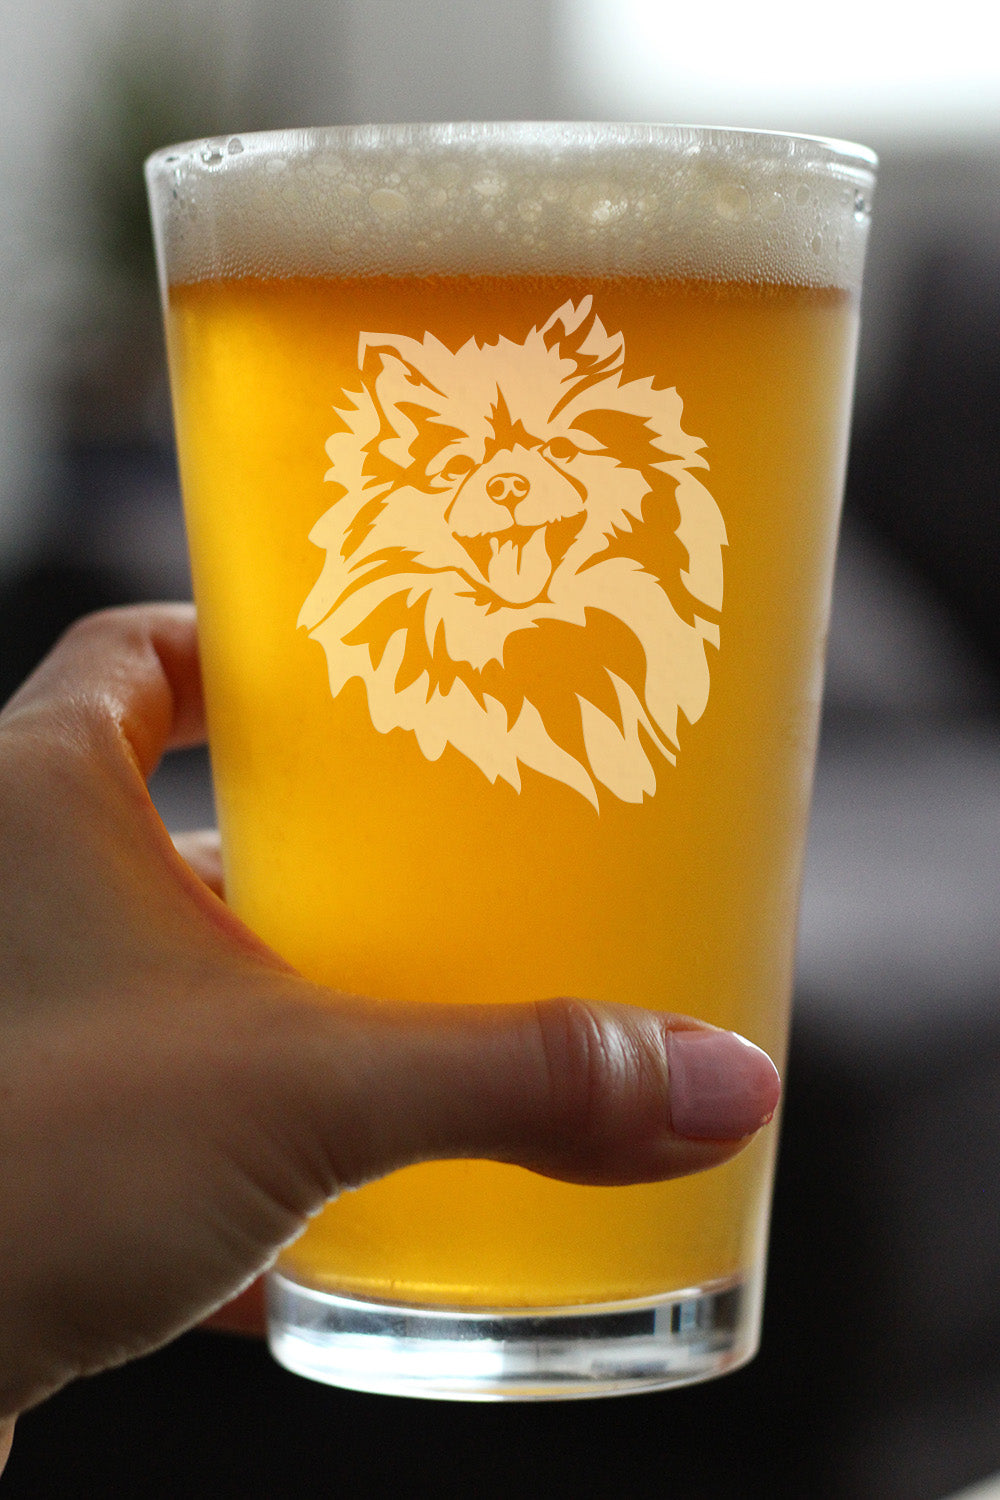 Pomeranian Face Pint Glass for Beer - Unique Dog Themed Decor and Gifts for Moms &amp; Dads of Pomeranians - 16 Oz